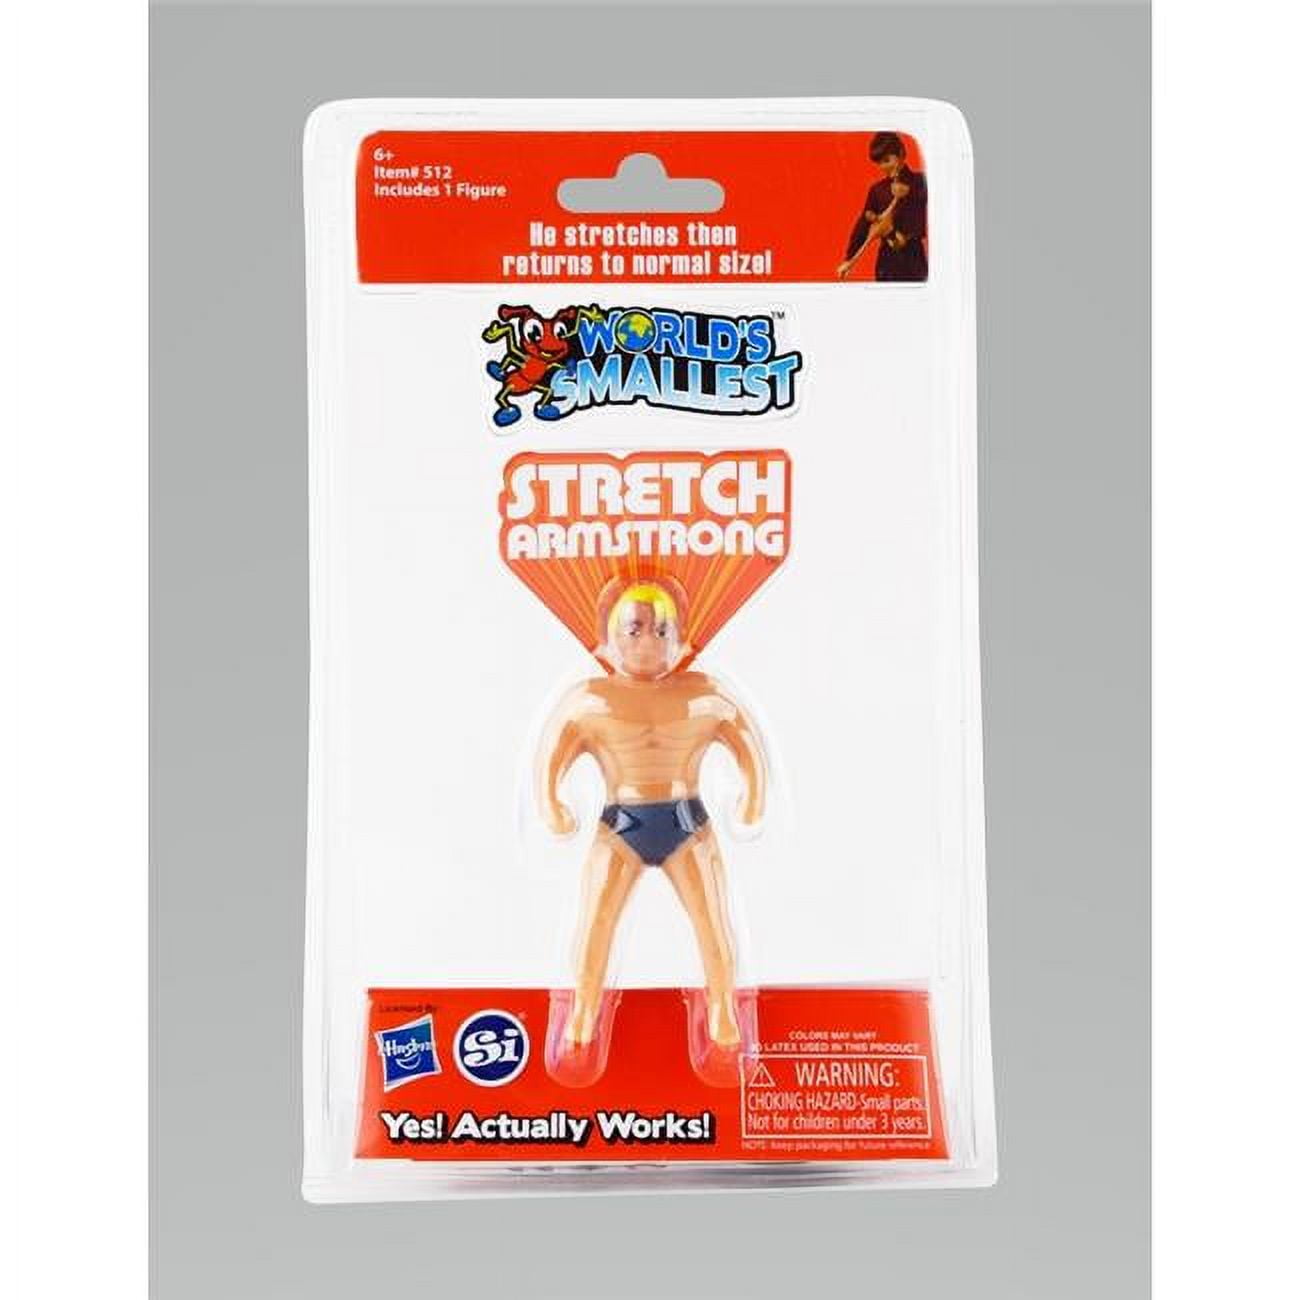 9033550 Worlds Smallest Stretch Armstrong Rubber, Multi Color